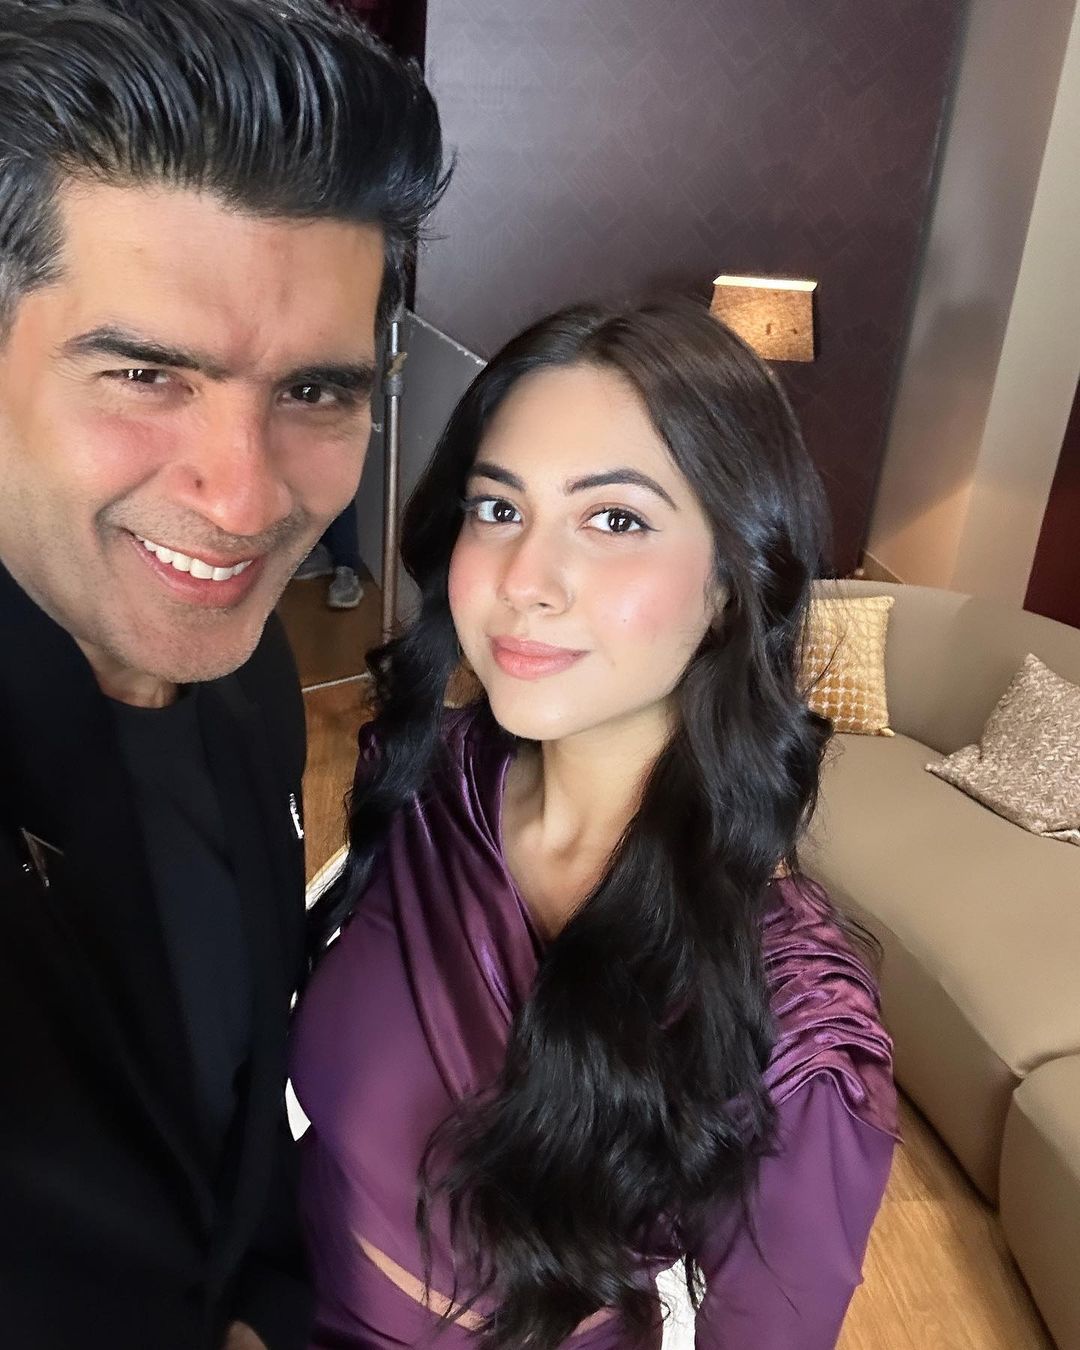 Is Our Telly World’s Talent Reem Sameer Shaikh Joining With Manish Malhotra For Her New Project? Find Out Here!